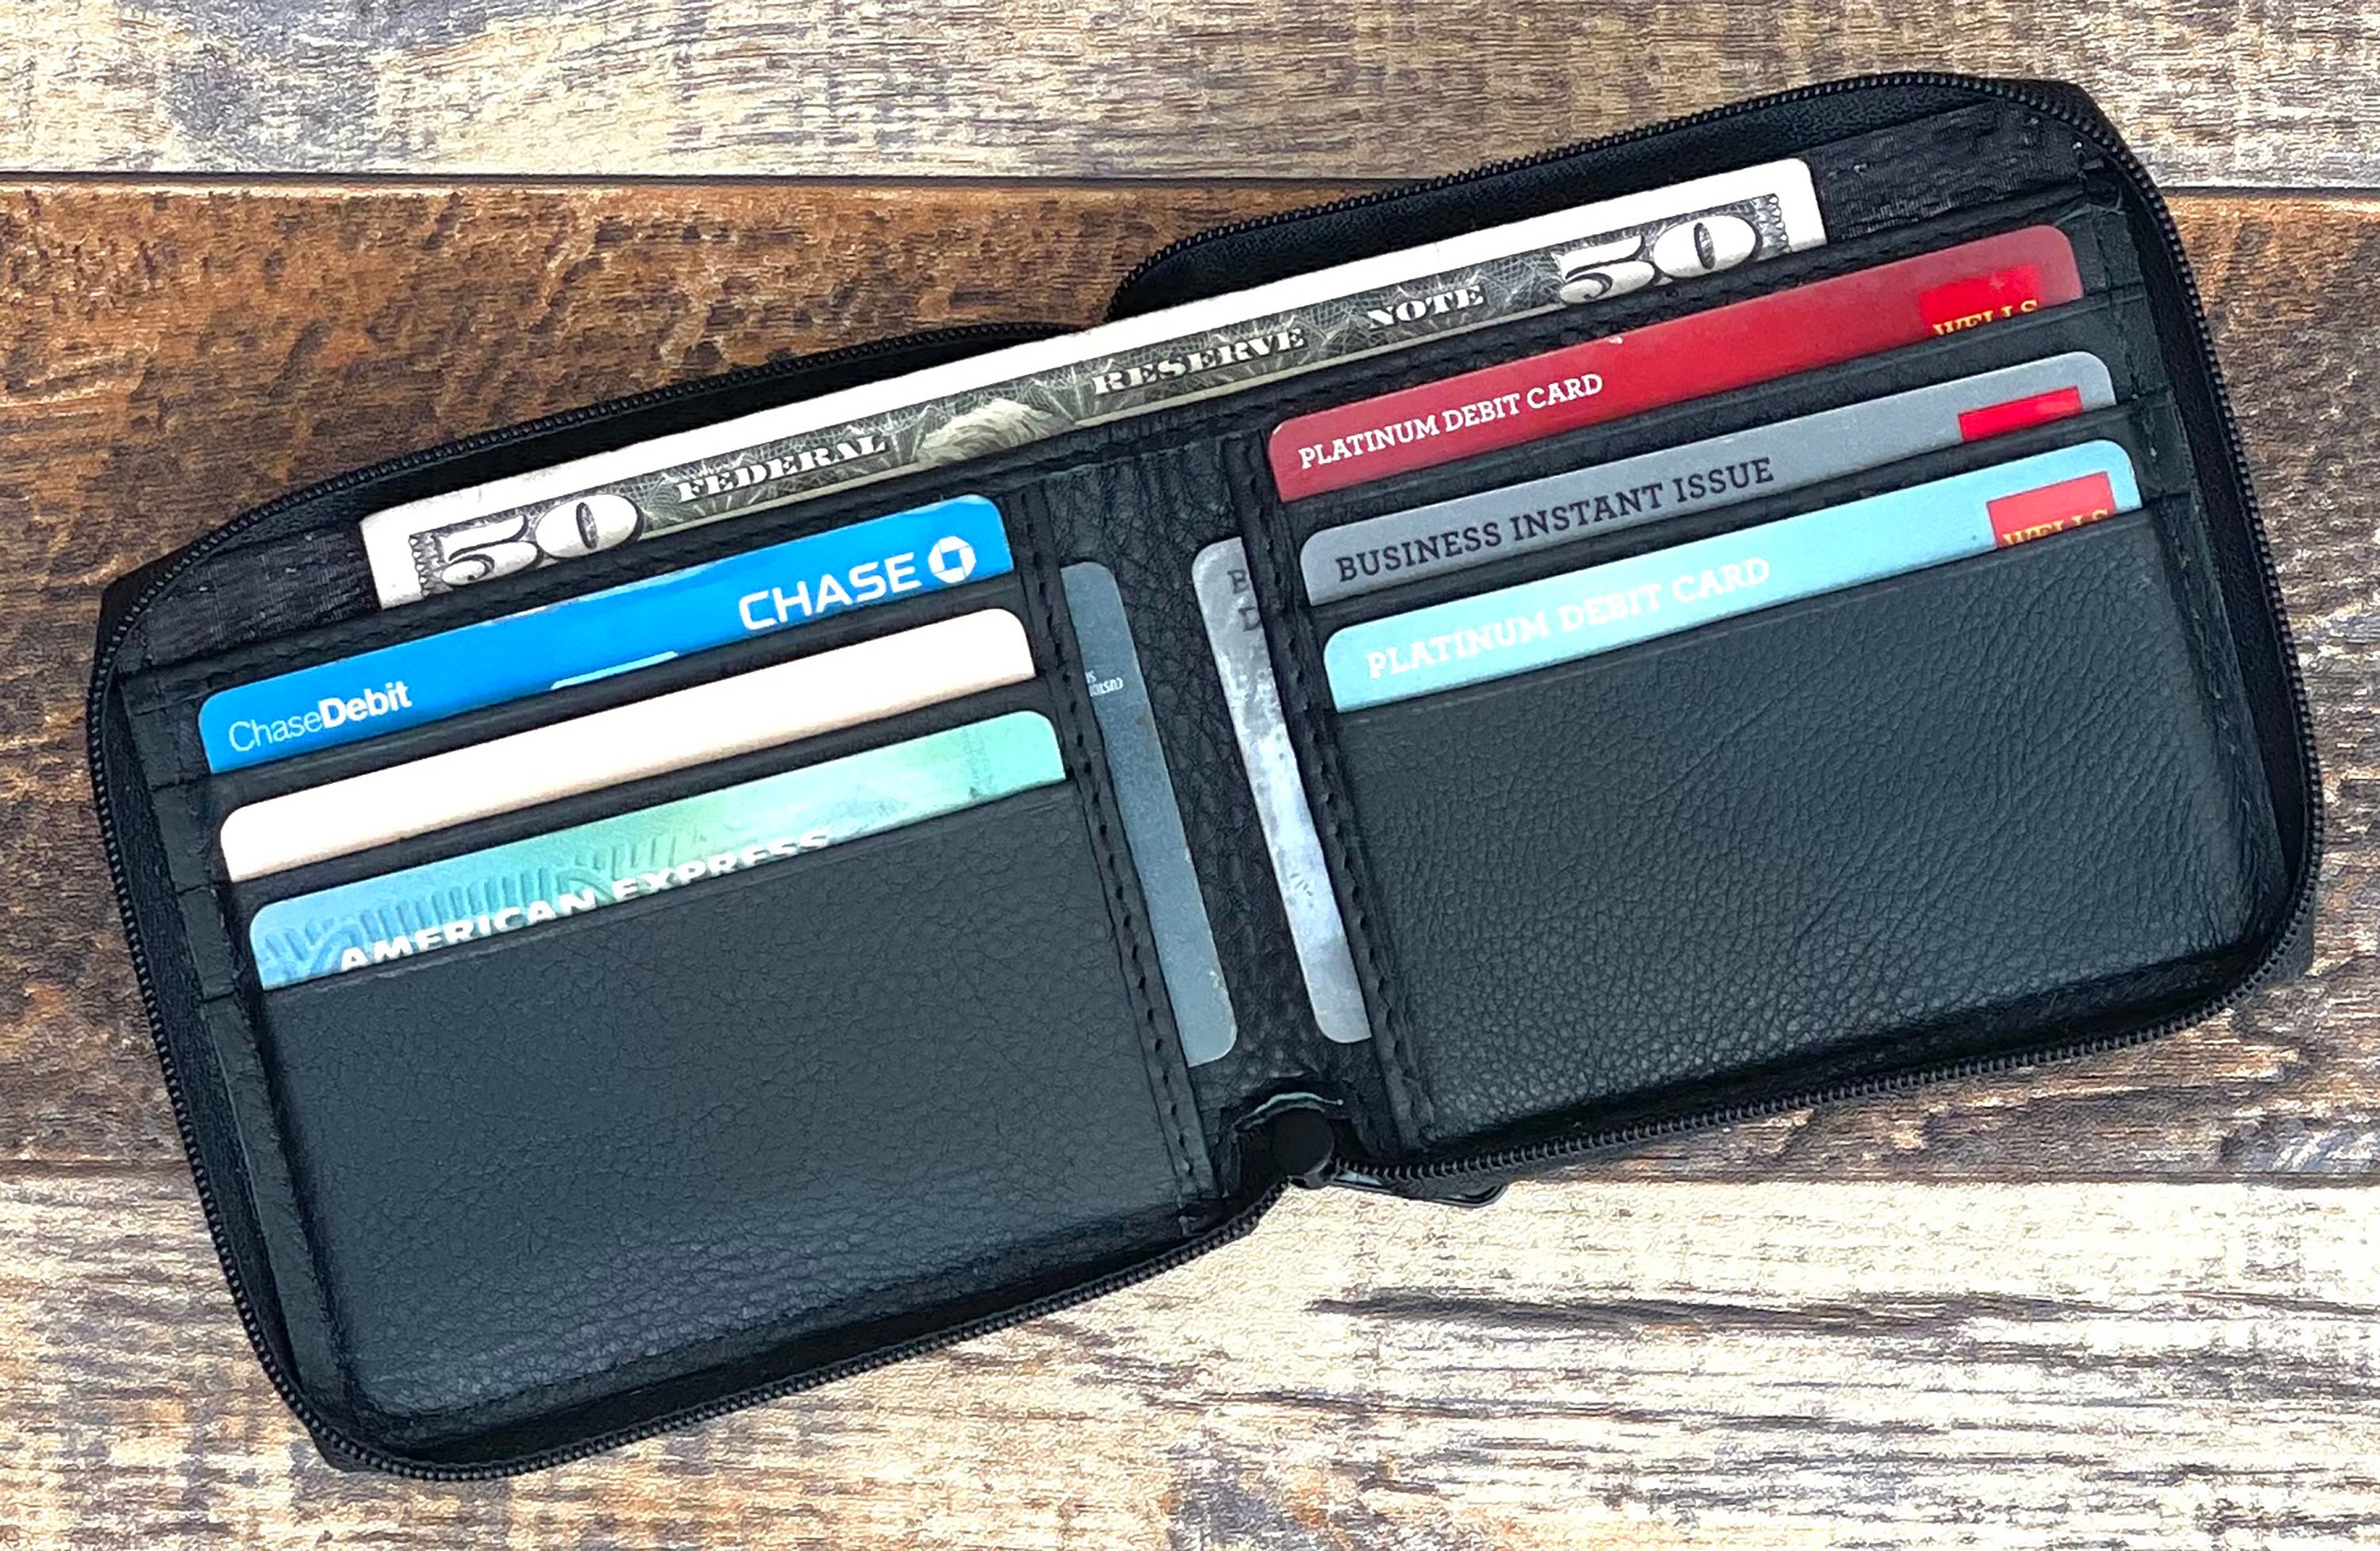 gzcz Chain Wallets for Men with Zipper Genuine Leather Bifold Rfid Blocking  Card Holder Coin Pocket Wallet - Yahoo Shopping